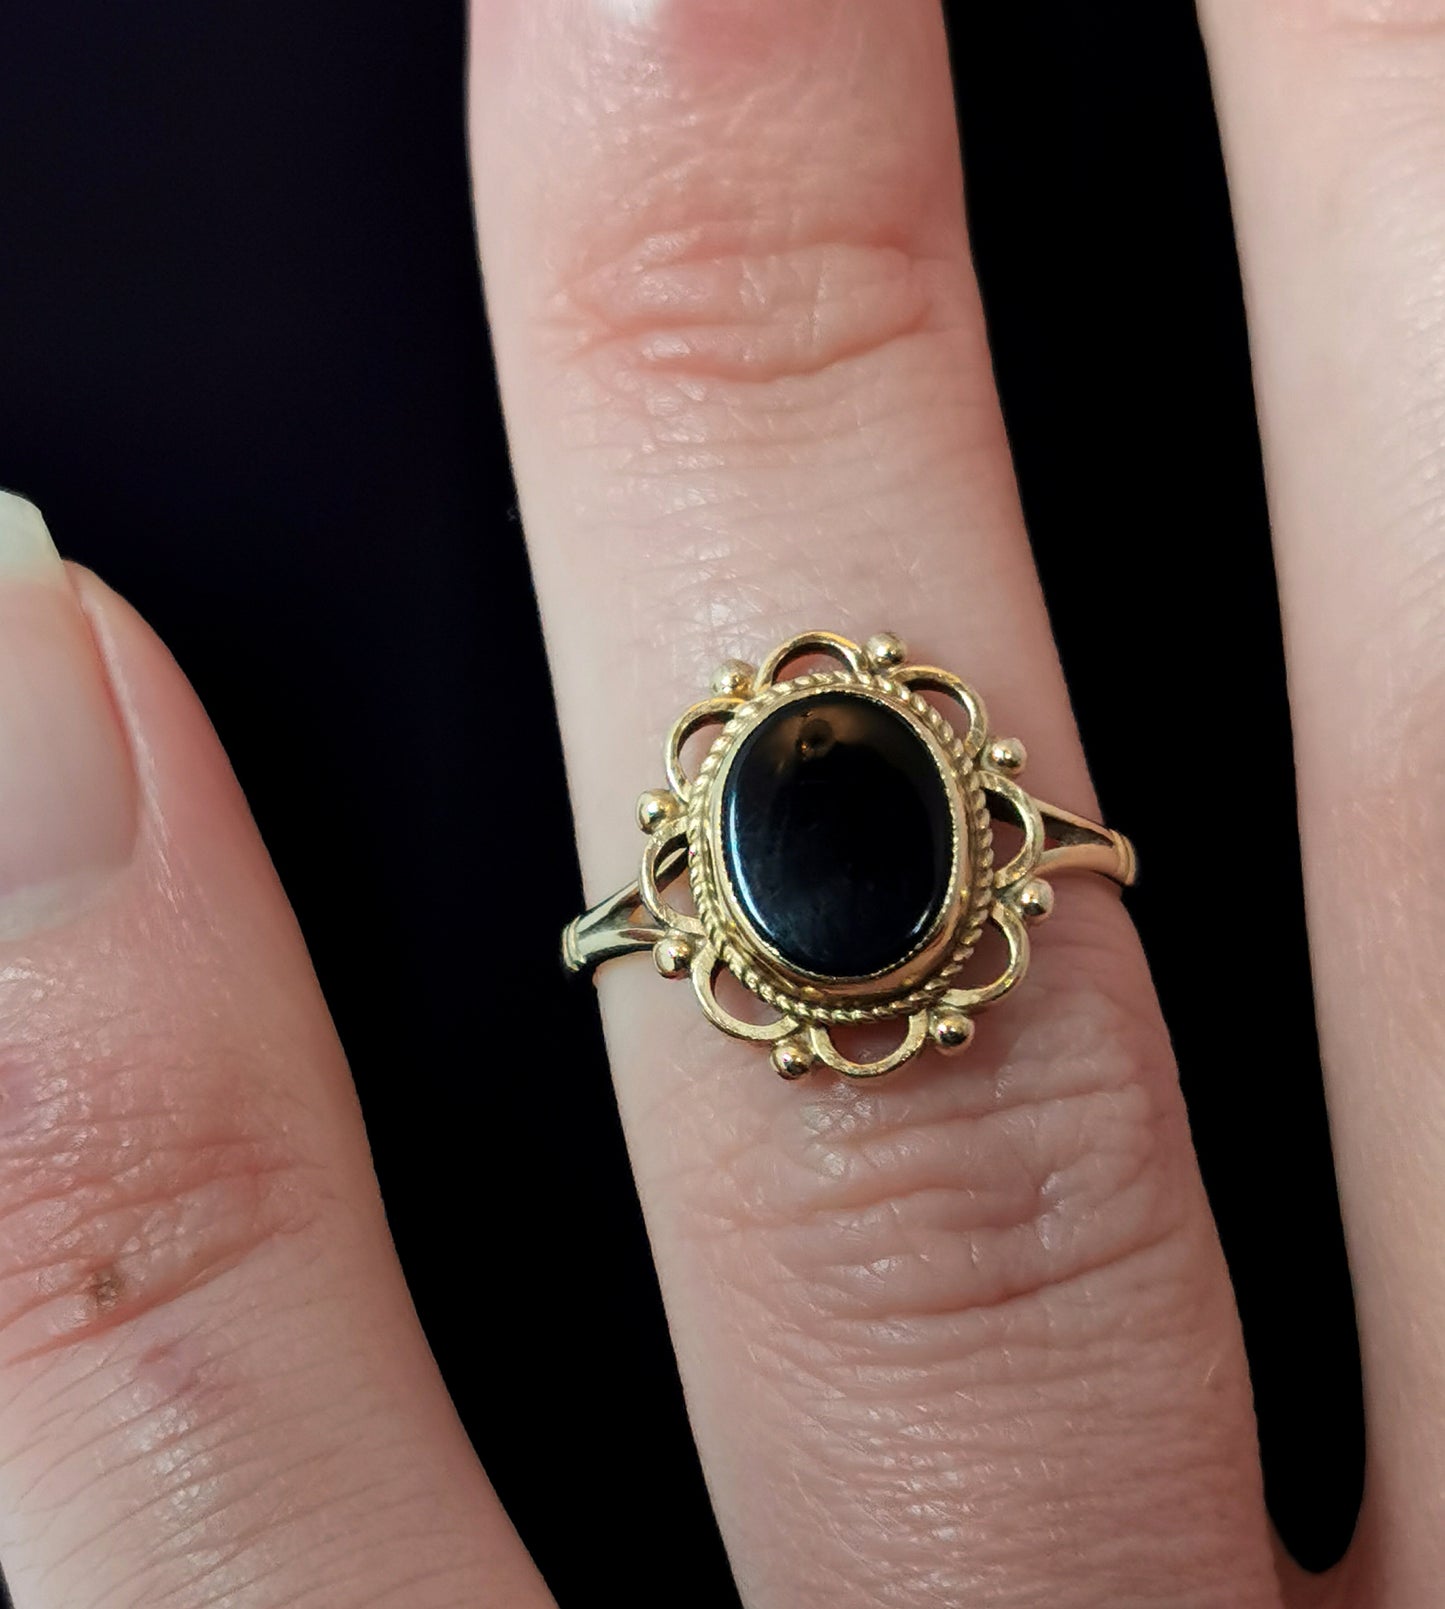 Vintage 9ct gold and Onyx cocktail ring